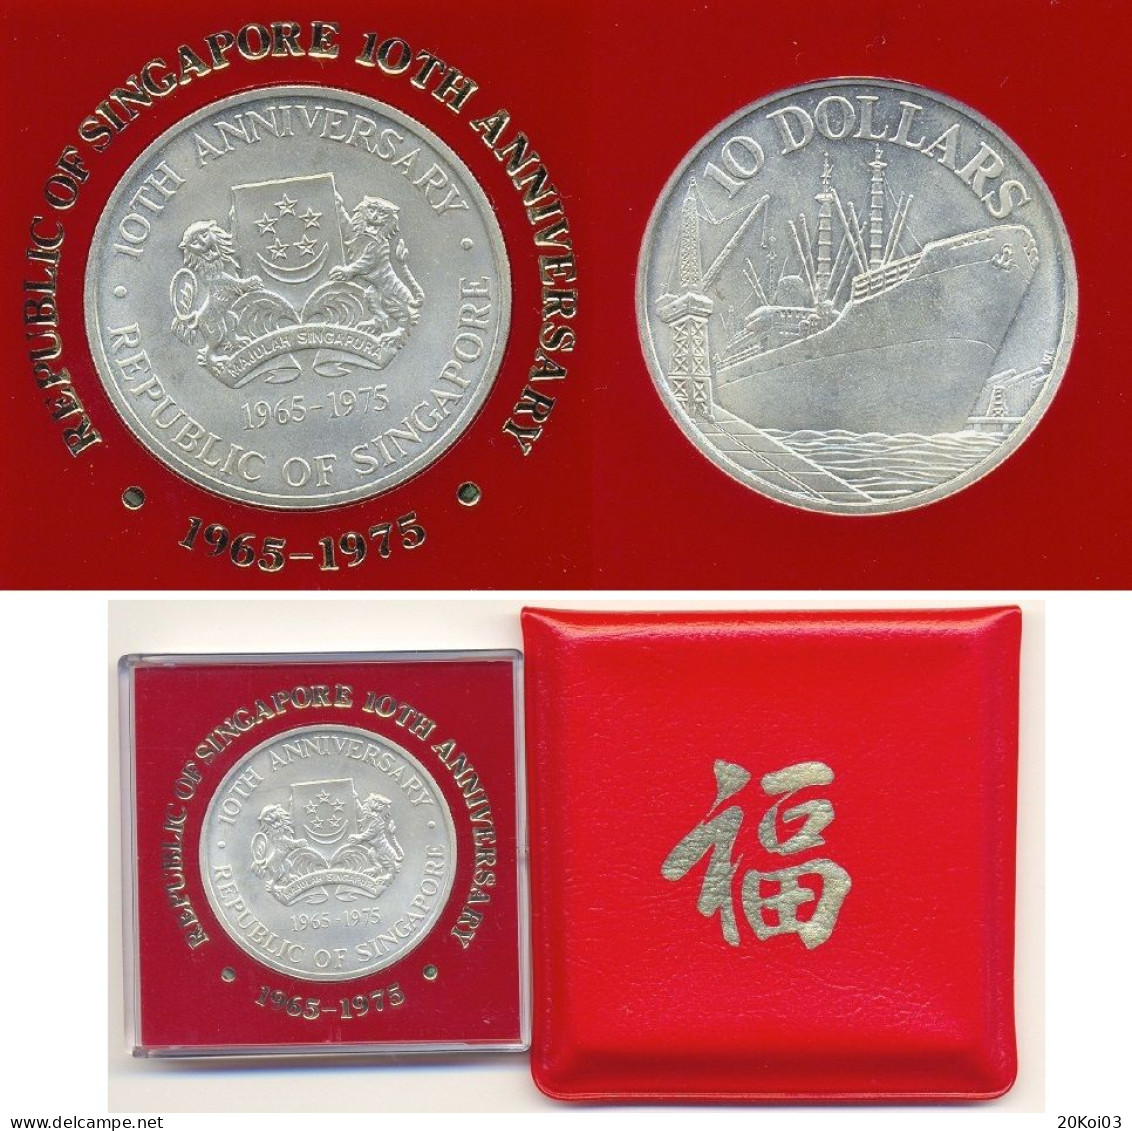 Singapore 10 Dollars 1965-1975 10th Anniversary Coin Argent-Silver - Singapur